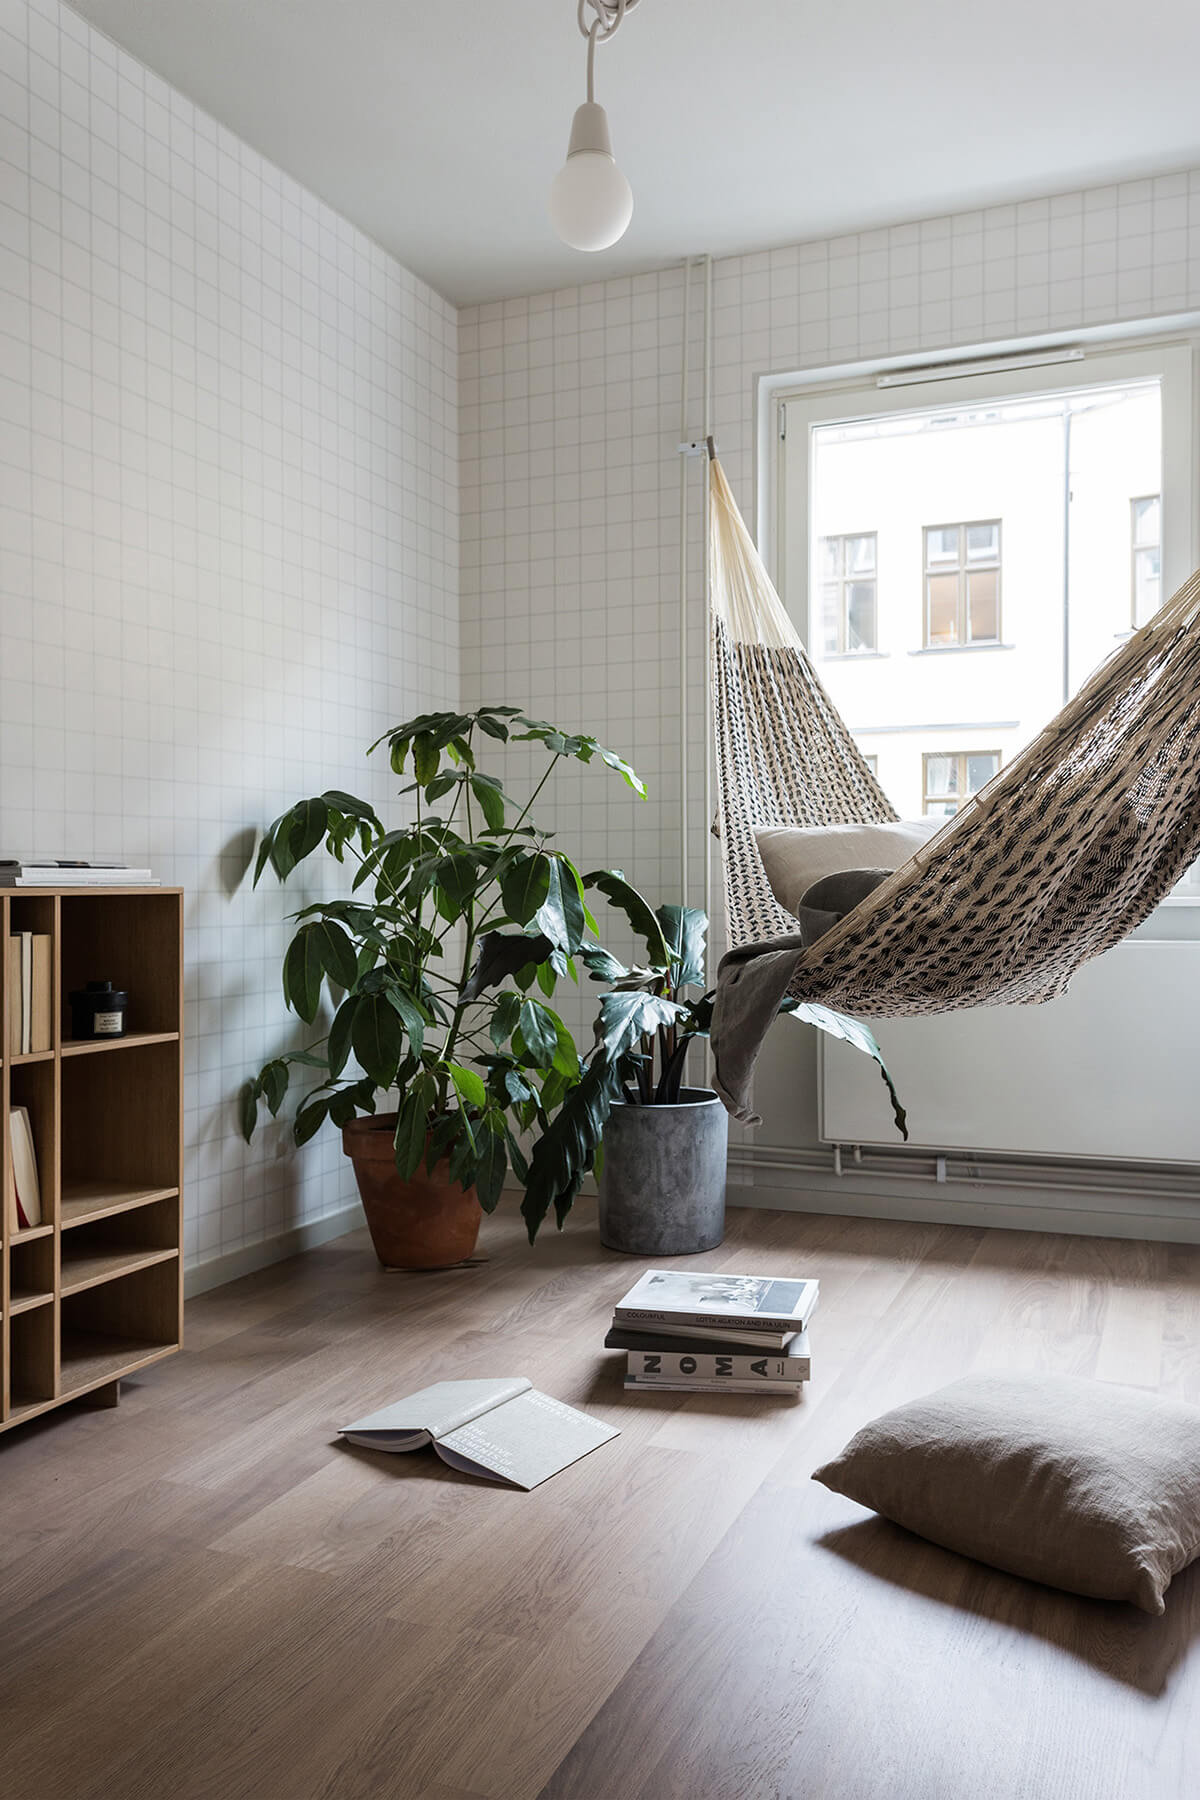 Hammock with Potted Plants